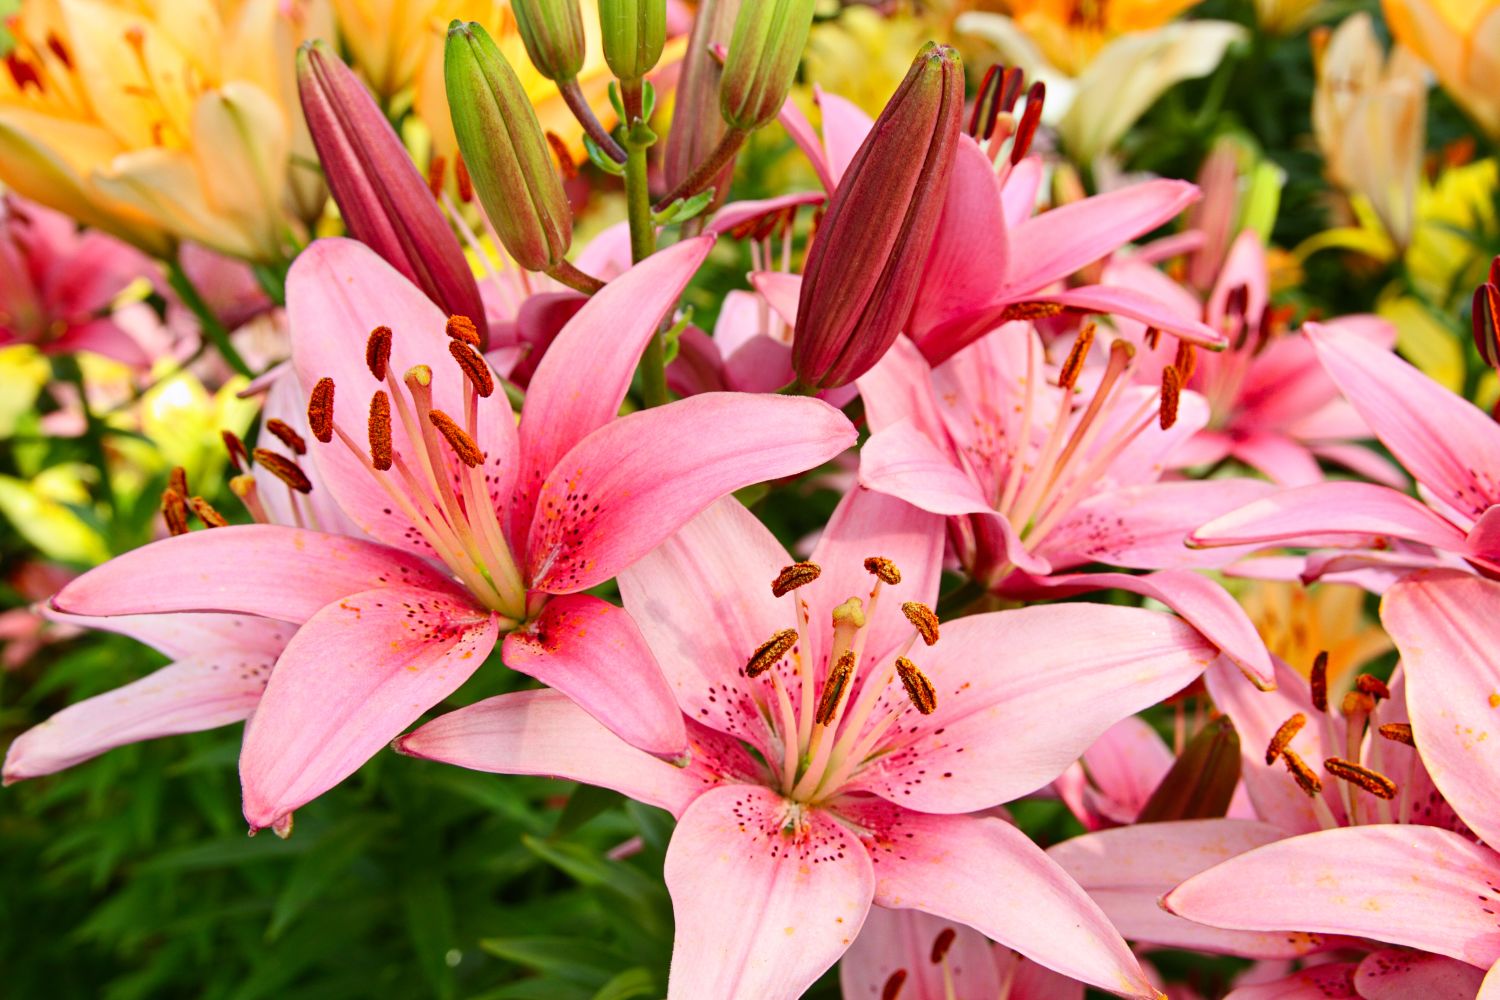 Lily plant care: expert tips - Plantura